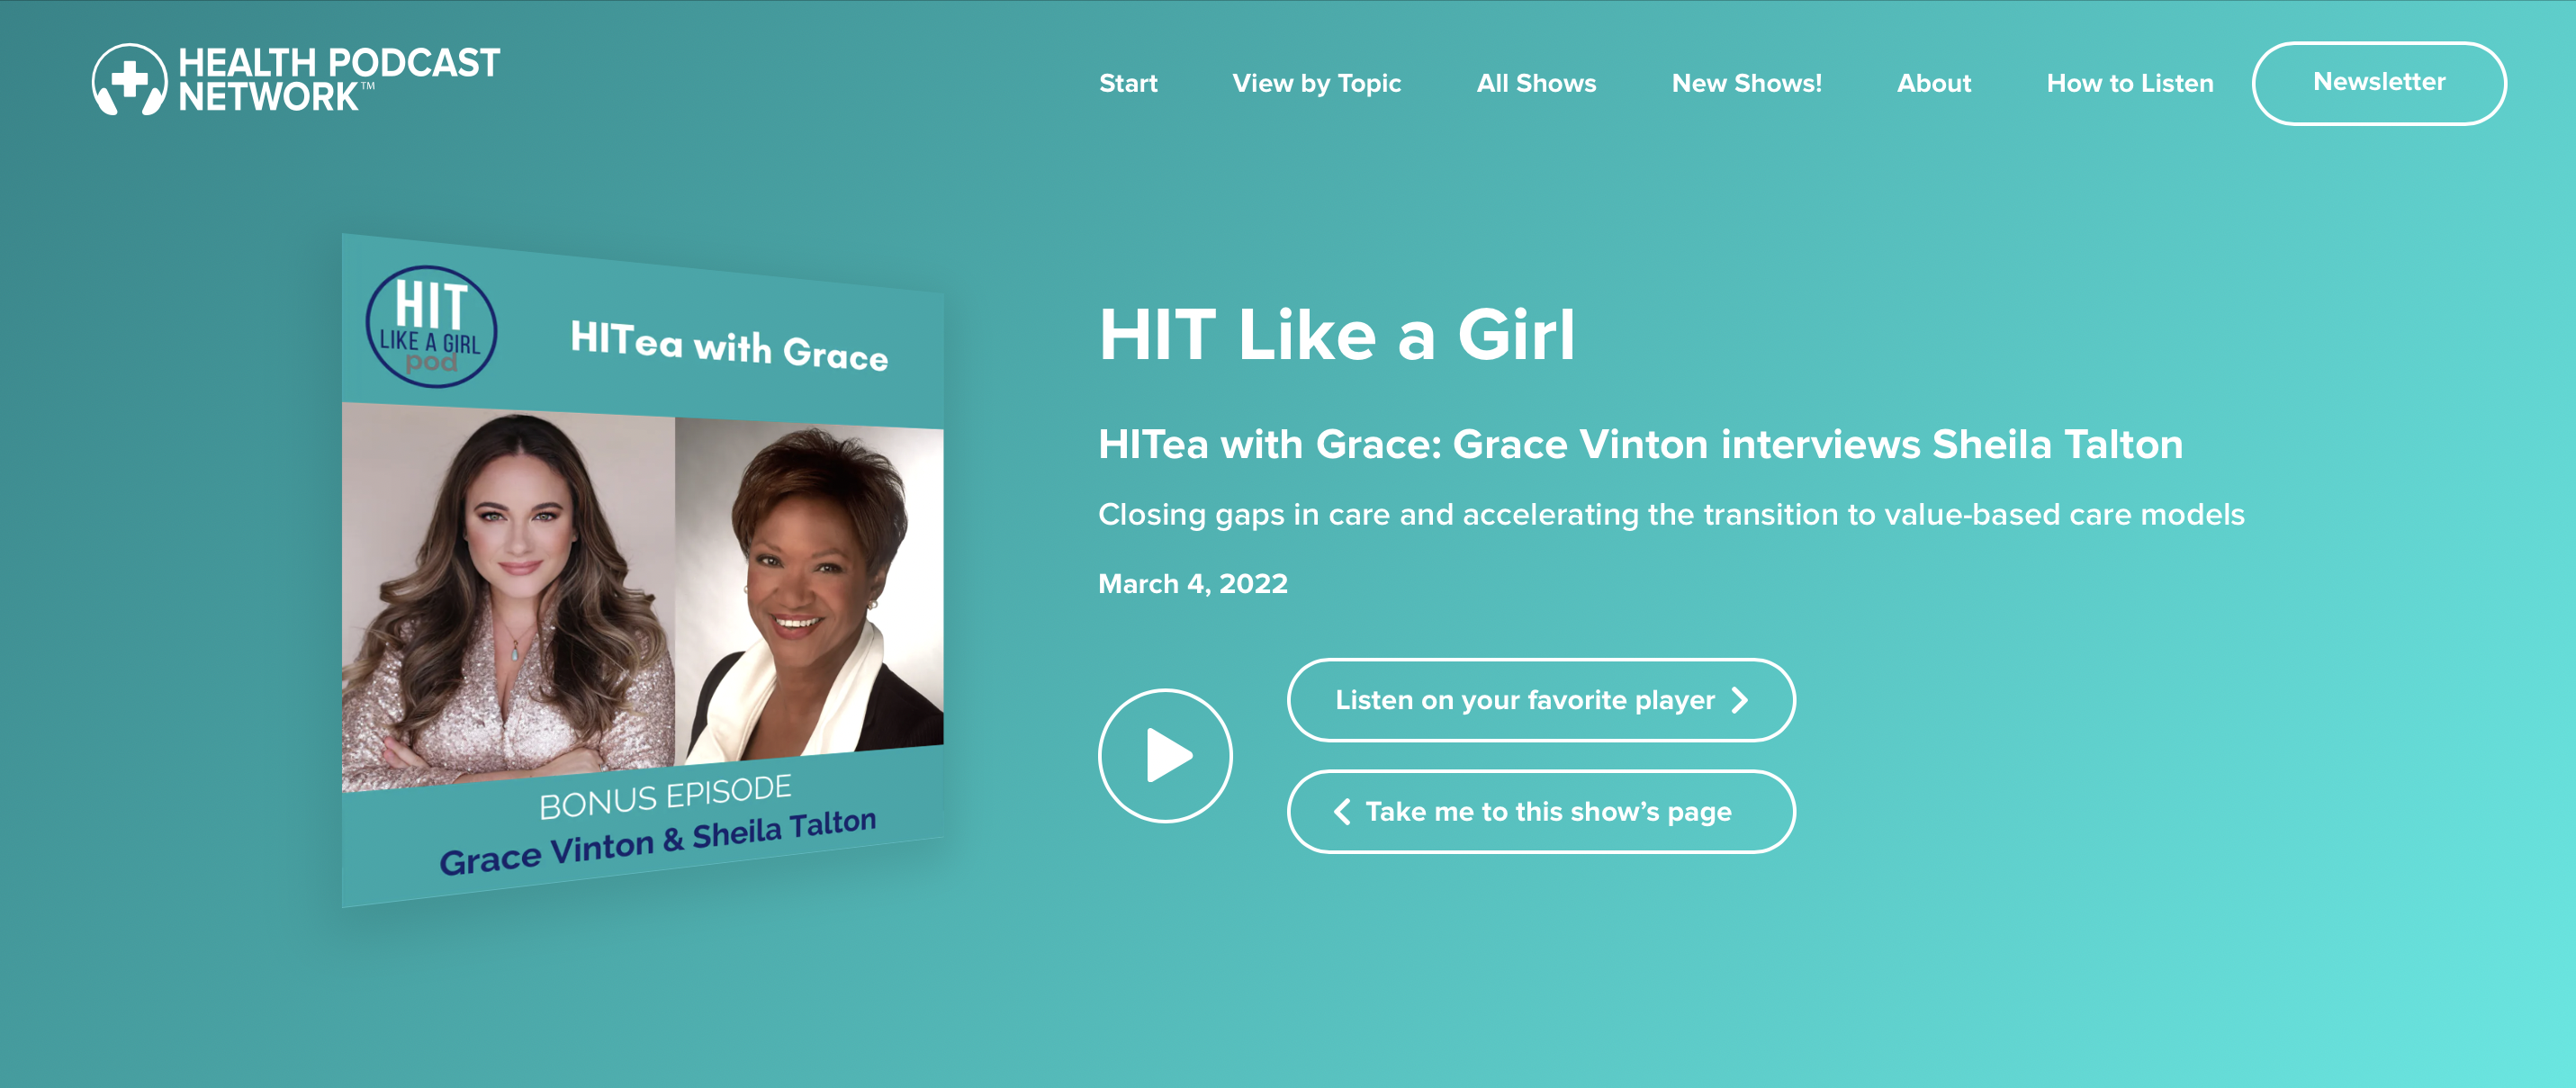 HIT Like a Girl Podcast